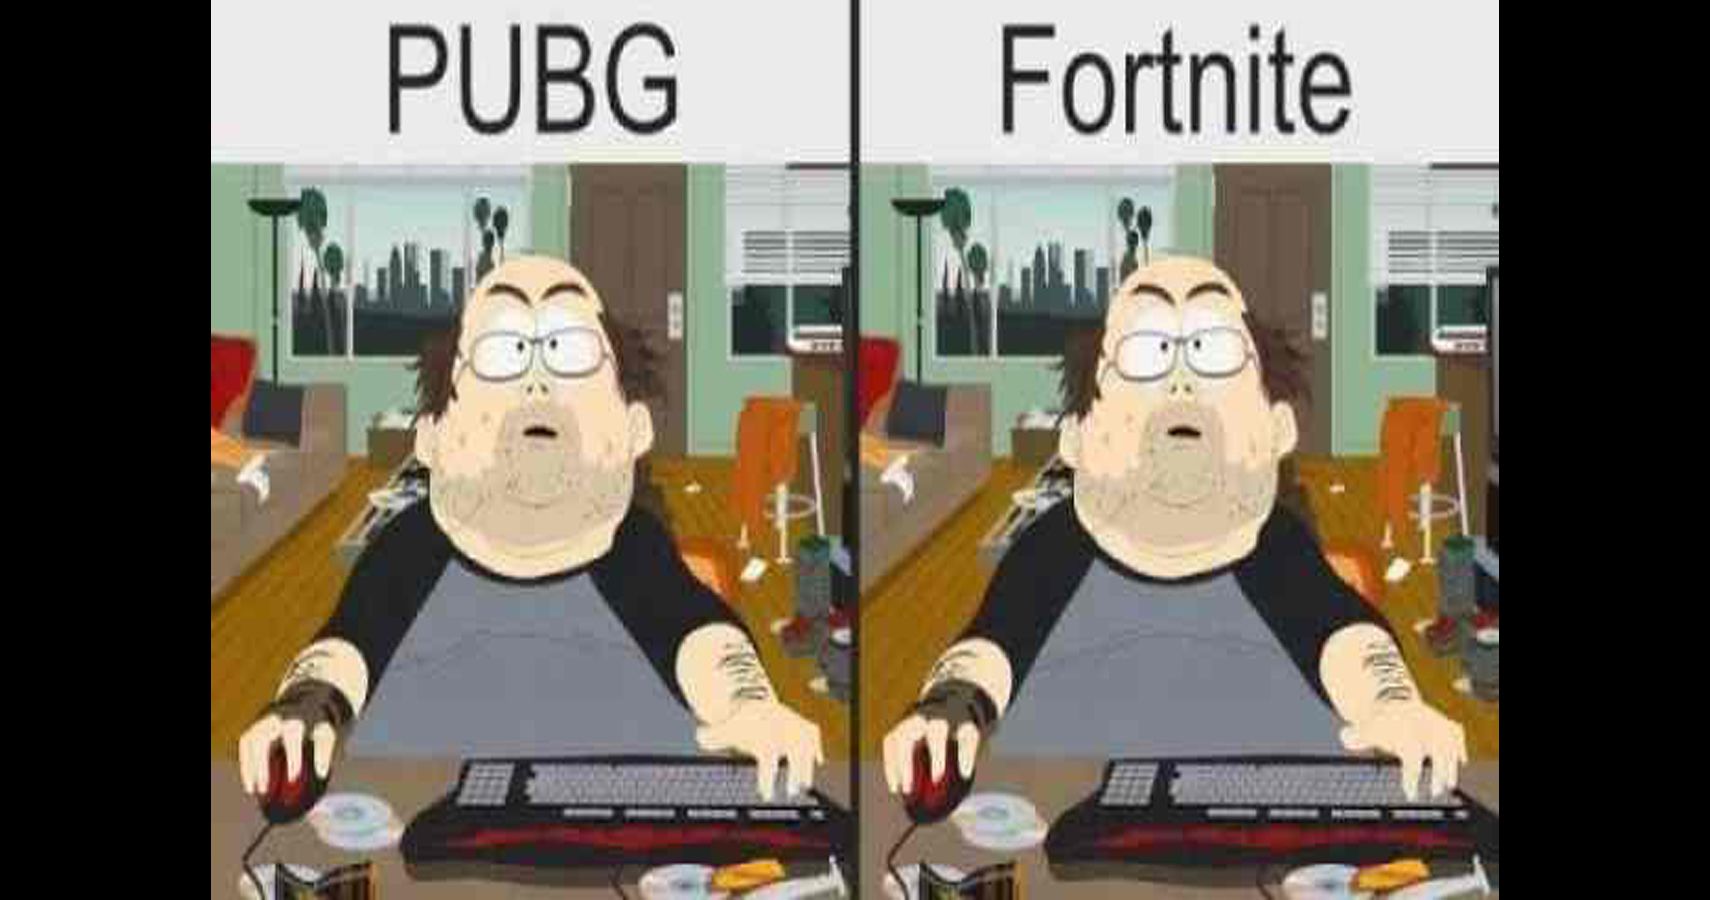 10 Fortnite Vs PUBG Memes That Are Too Hilarious For Words 